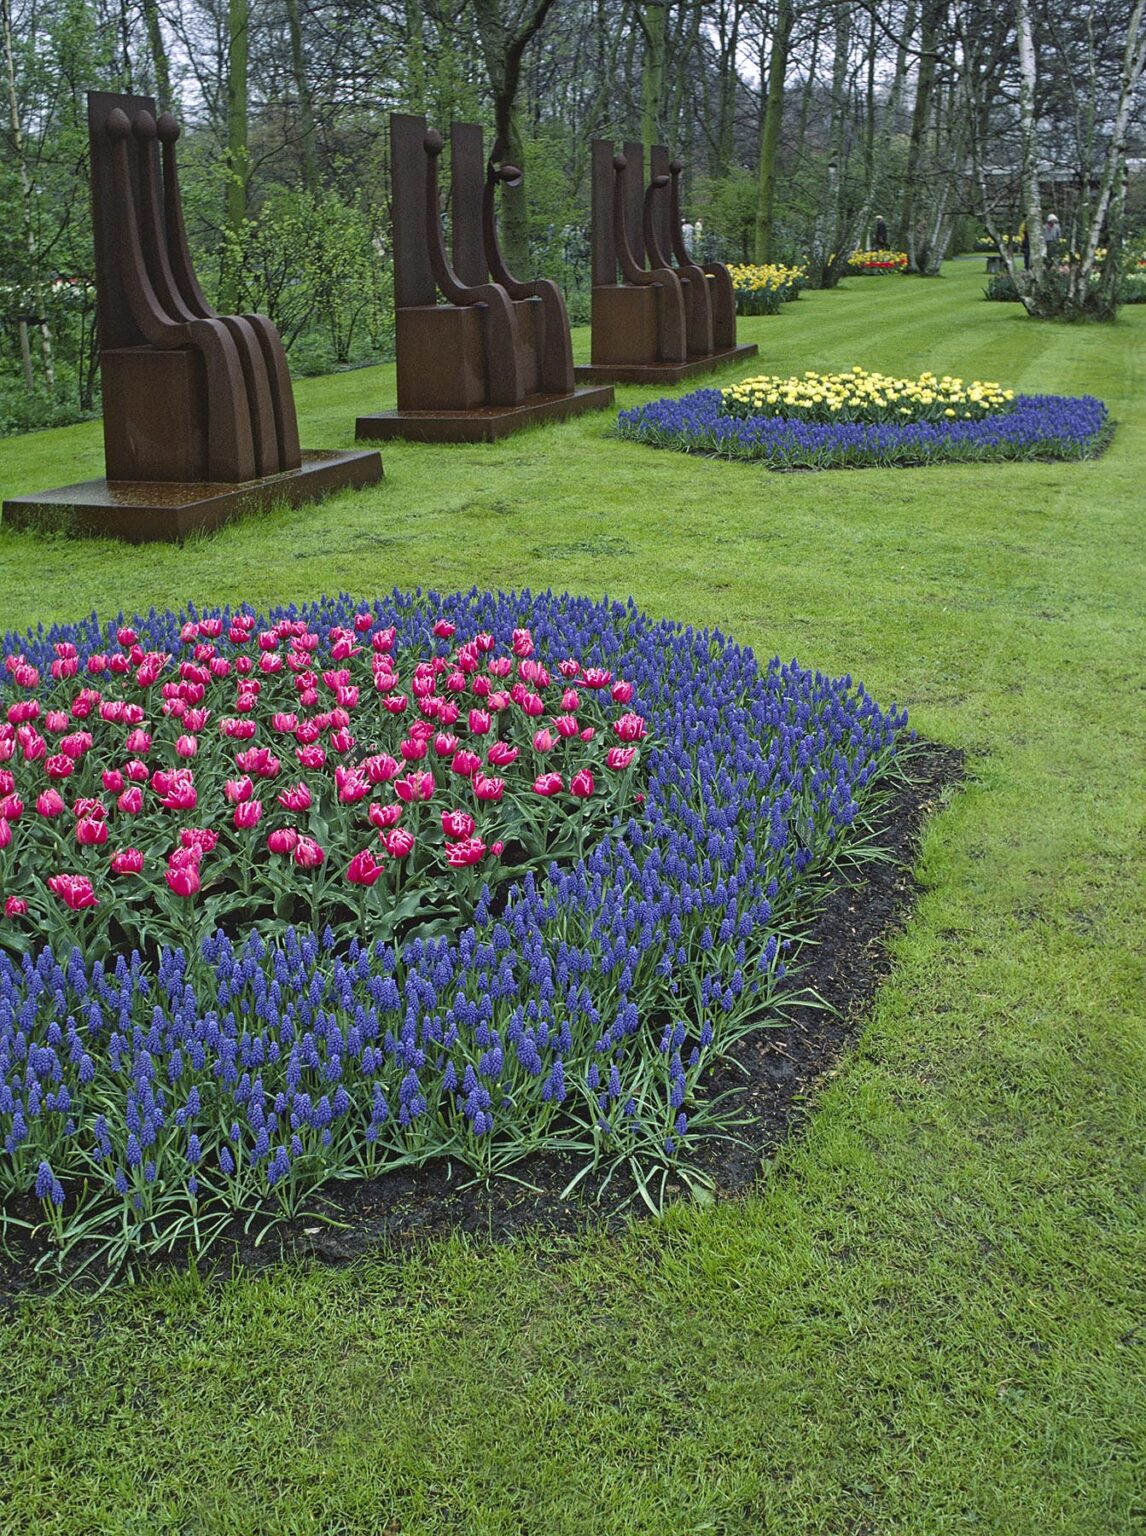 The KUKENHOFF GARDENS grow every kind of TULIP imaginable & other bulbs, plants and trees as well - THE NETHERLANDS